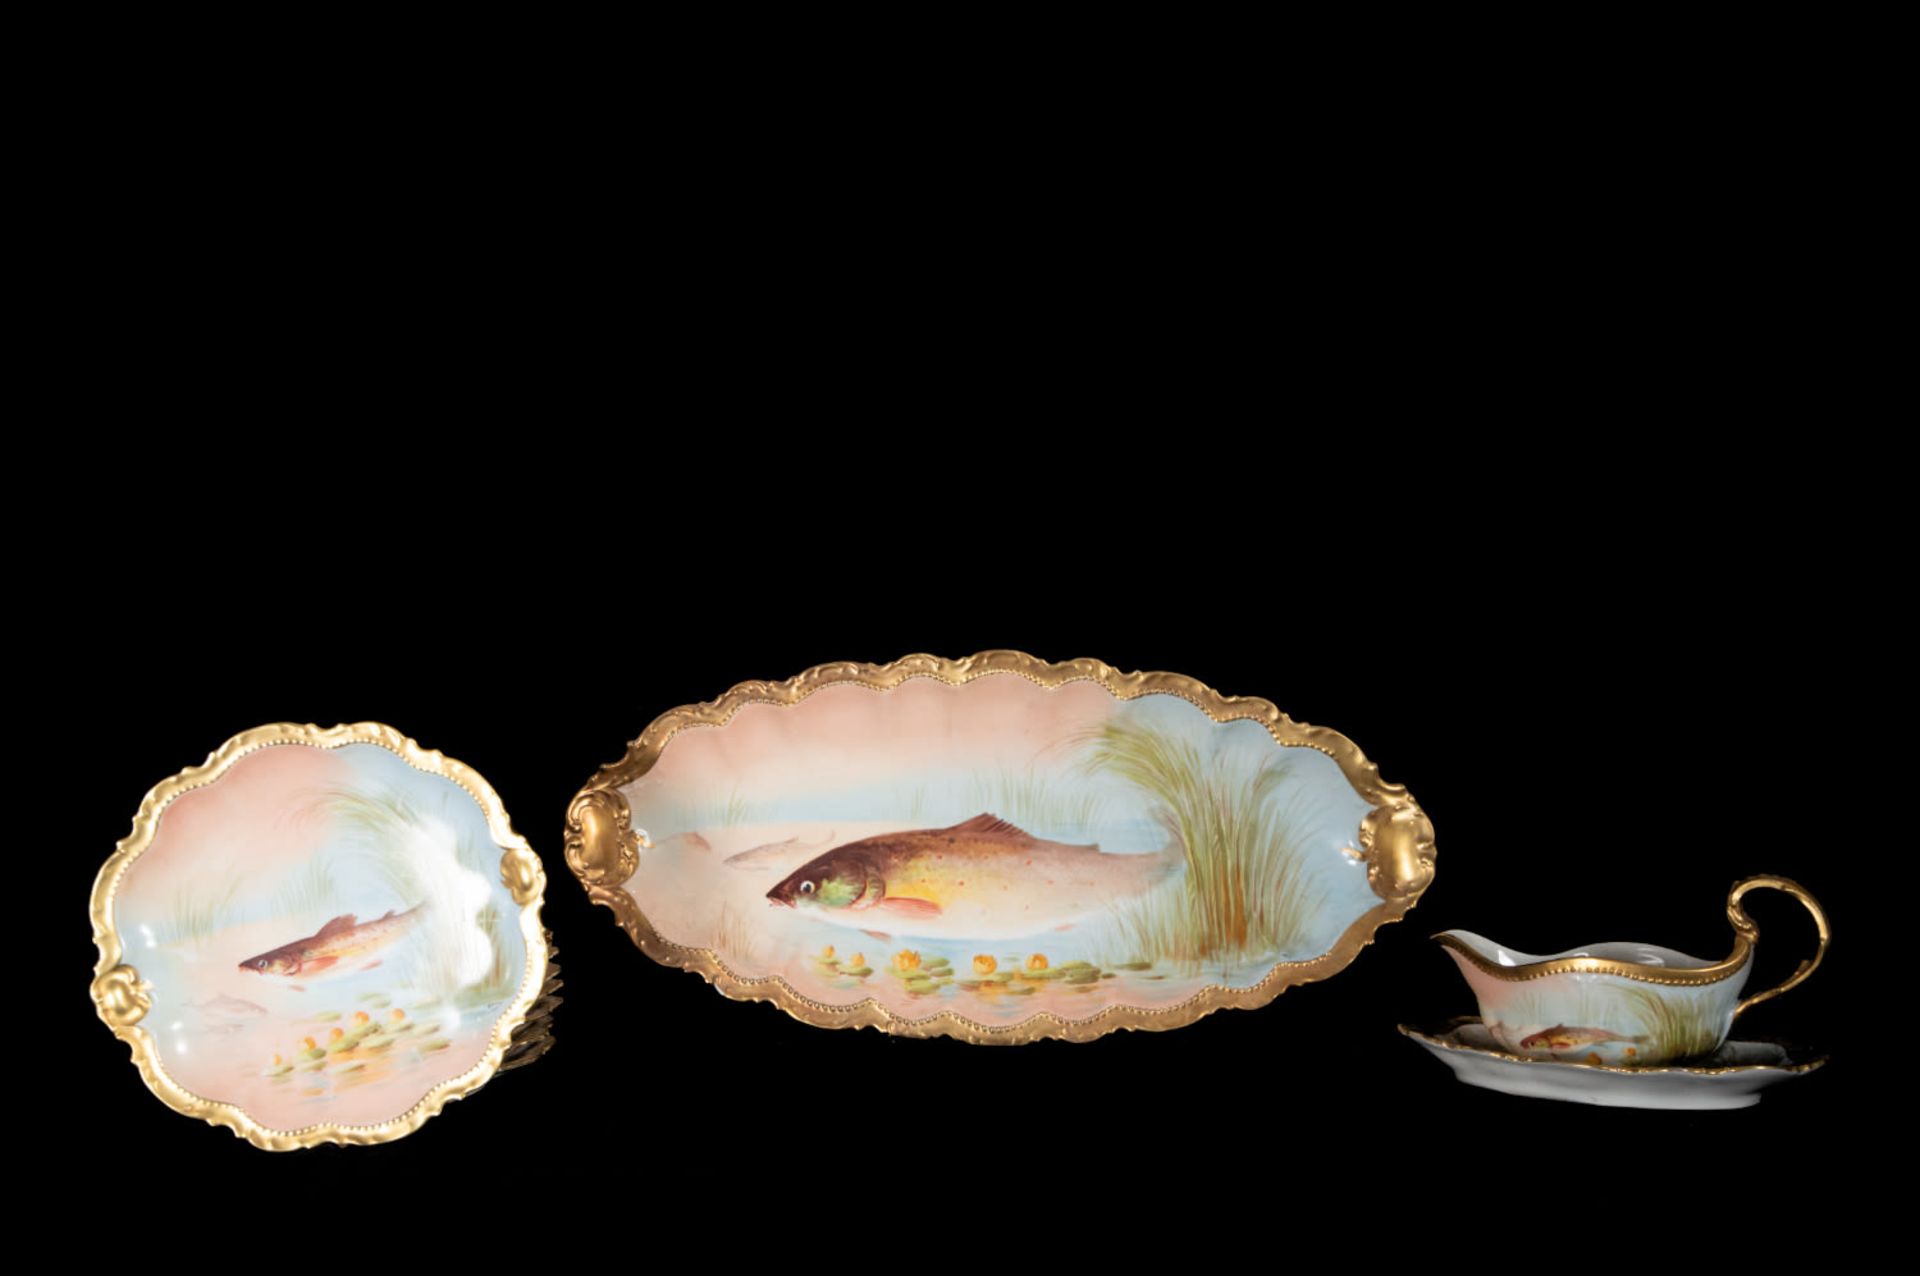 19th Century Limoges Porcelain Fish Dinnerware Set by the Count of Artois, 19th Century